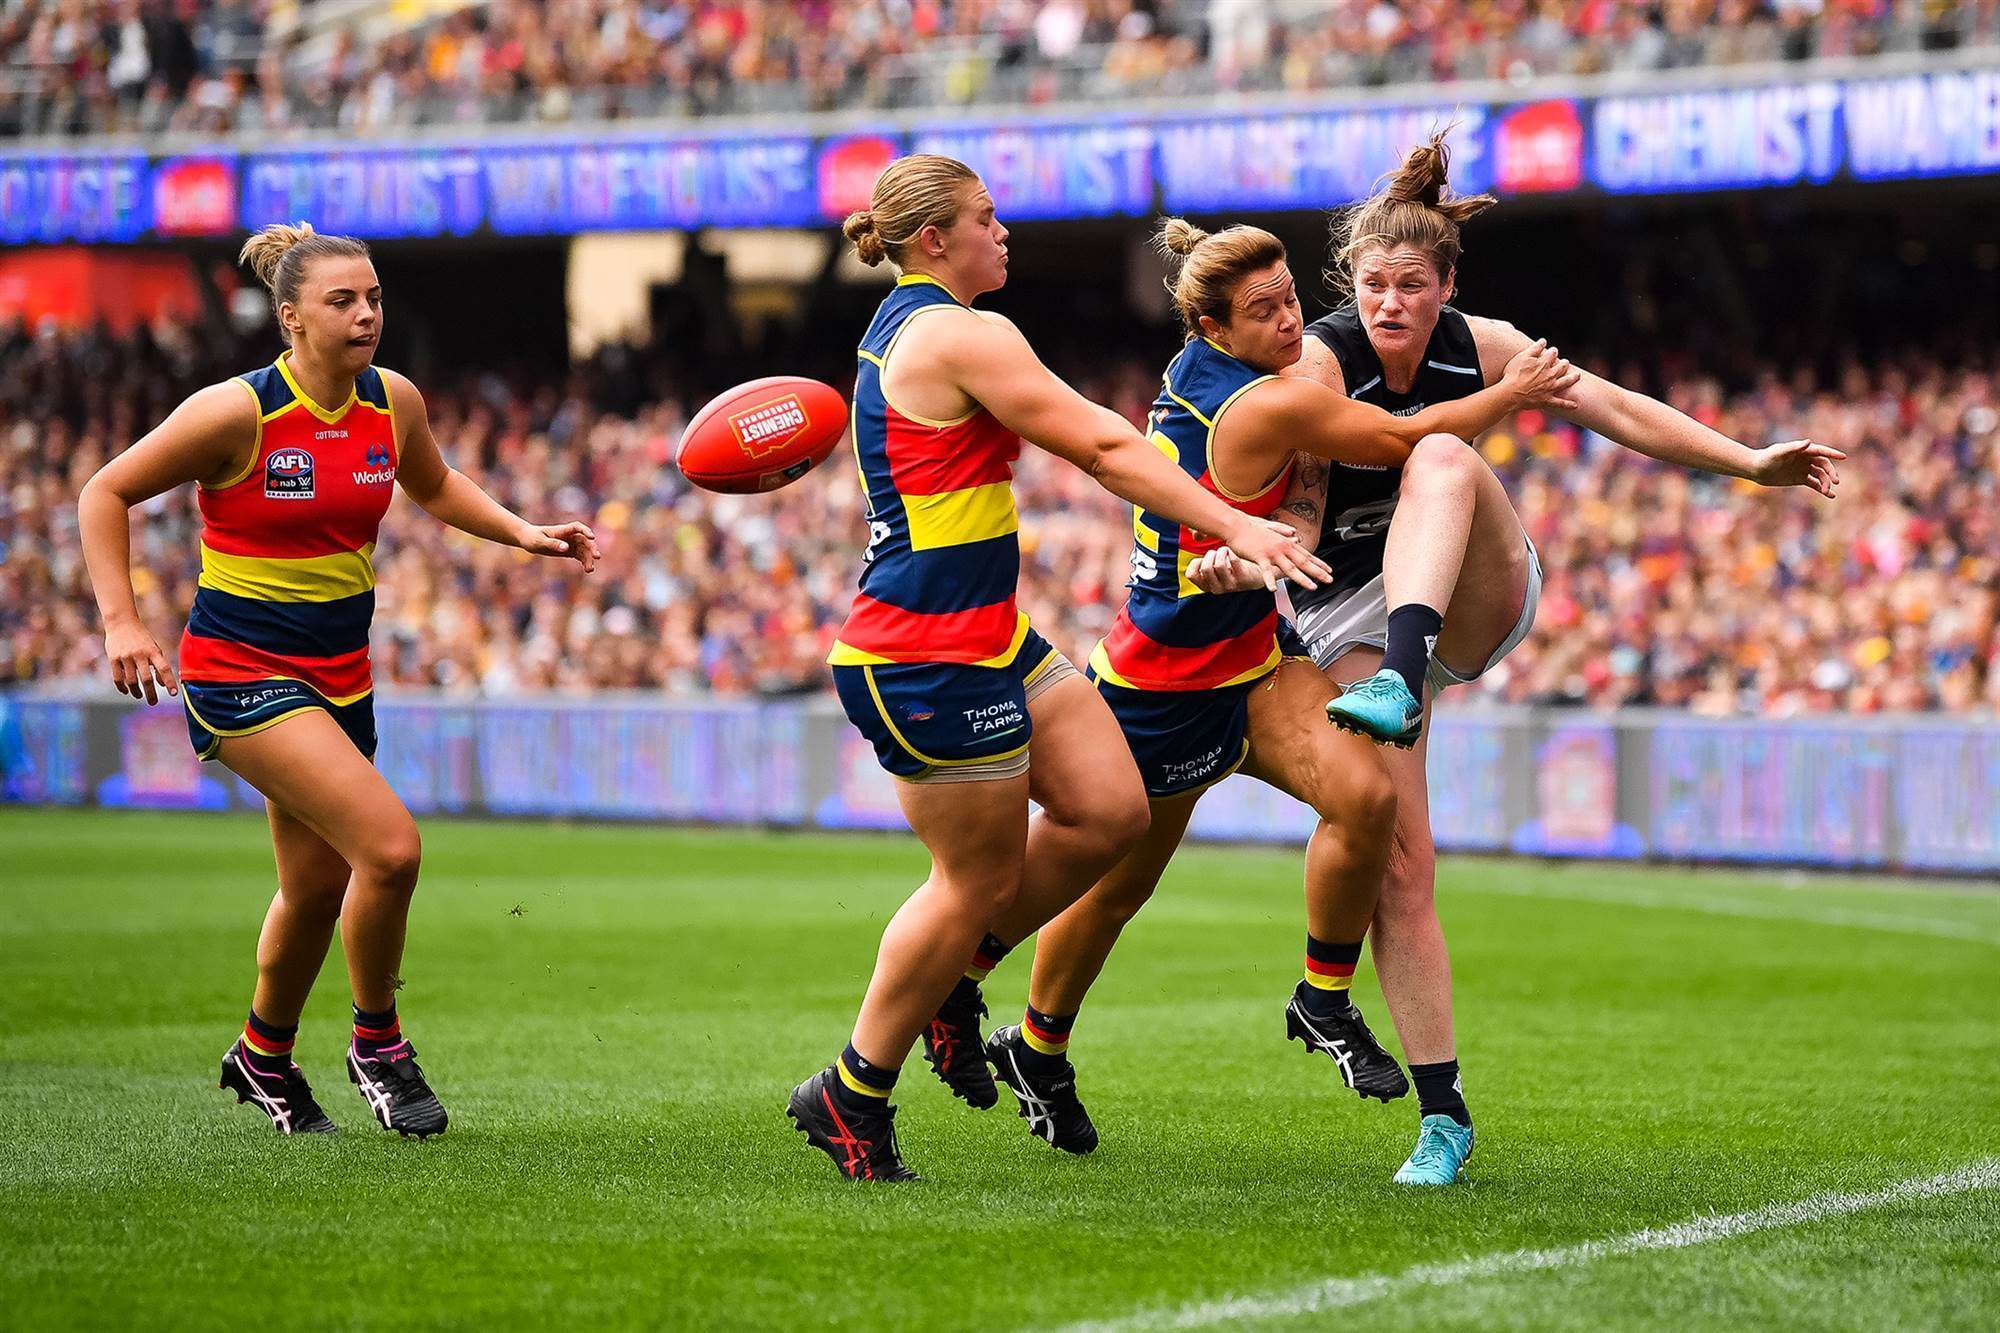 Pic special 2019 AFLW Grand Final AFL The Women's Game Australia